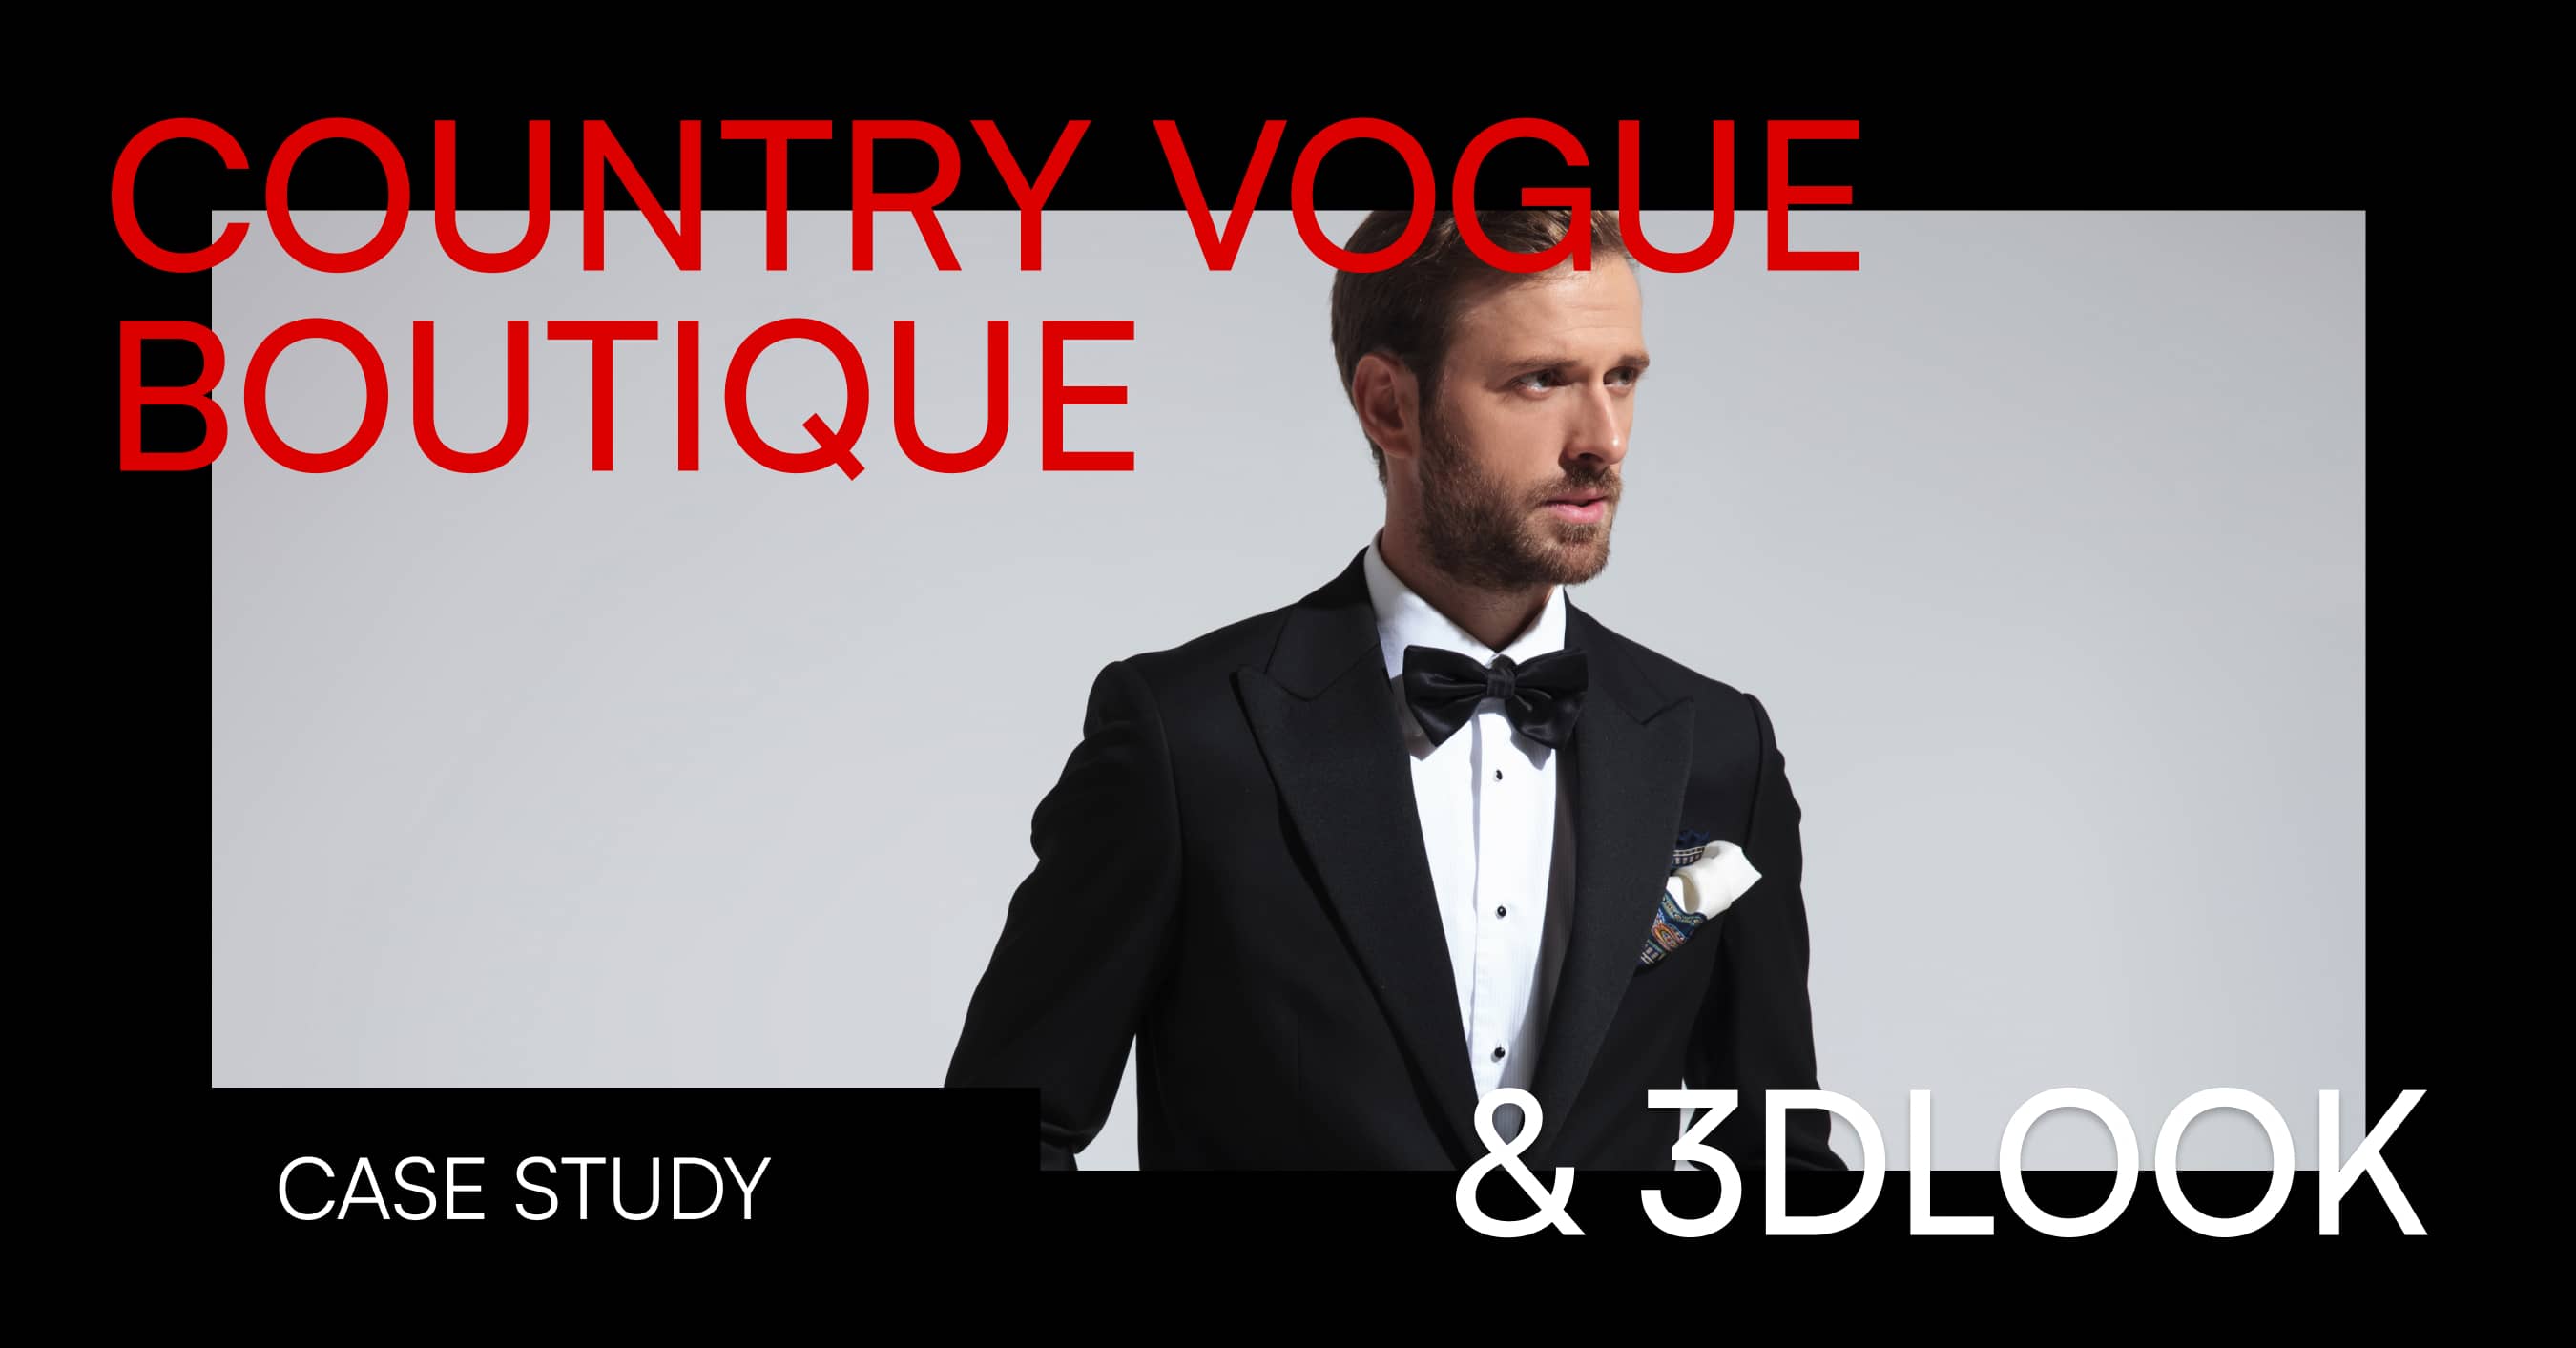 Case study on Country Vogue Boutique and their Mobile Tailor service, focusing on fitting errors.